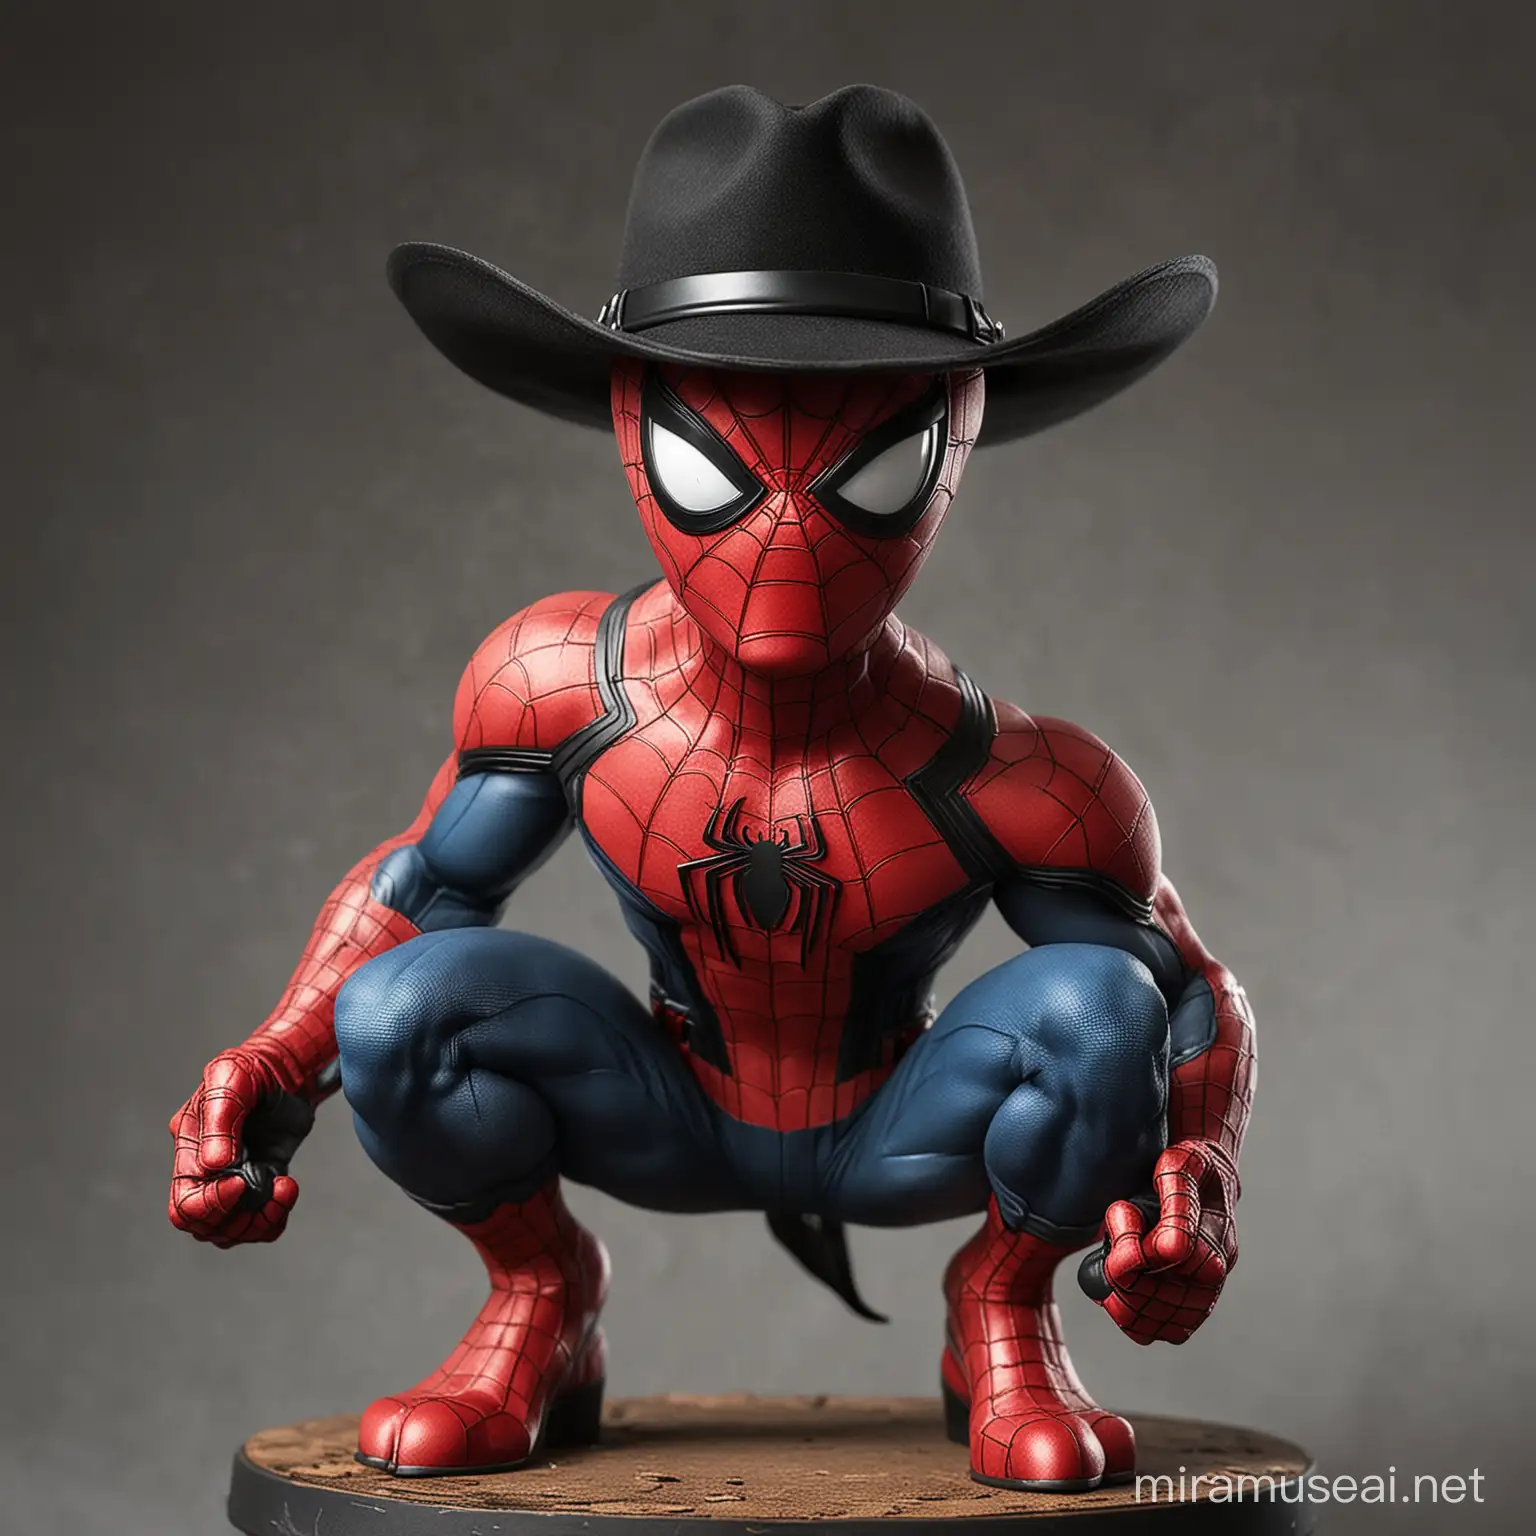 Spiderman with a black cowboy hat
